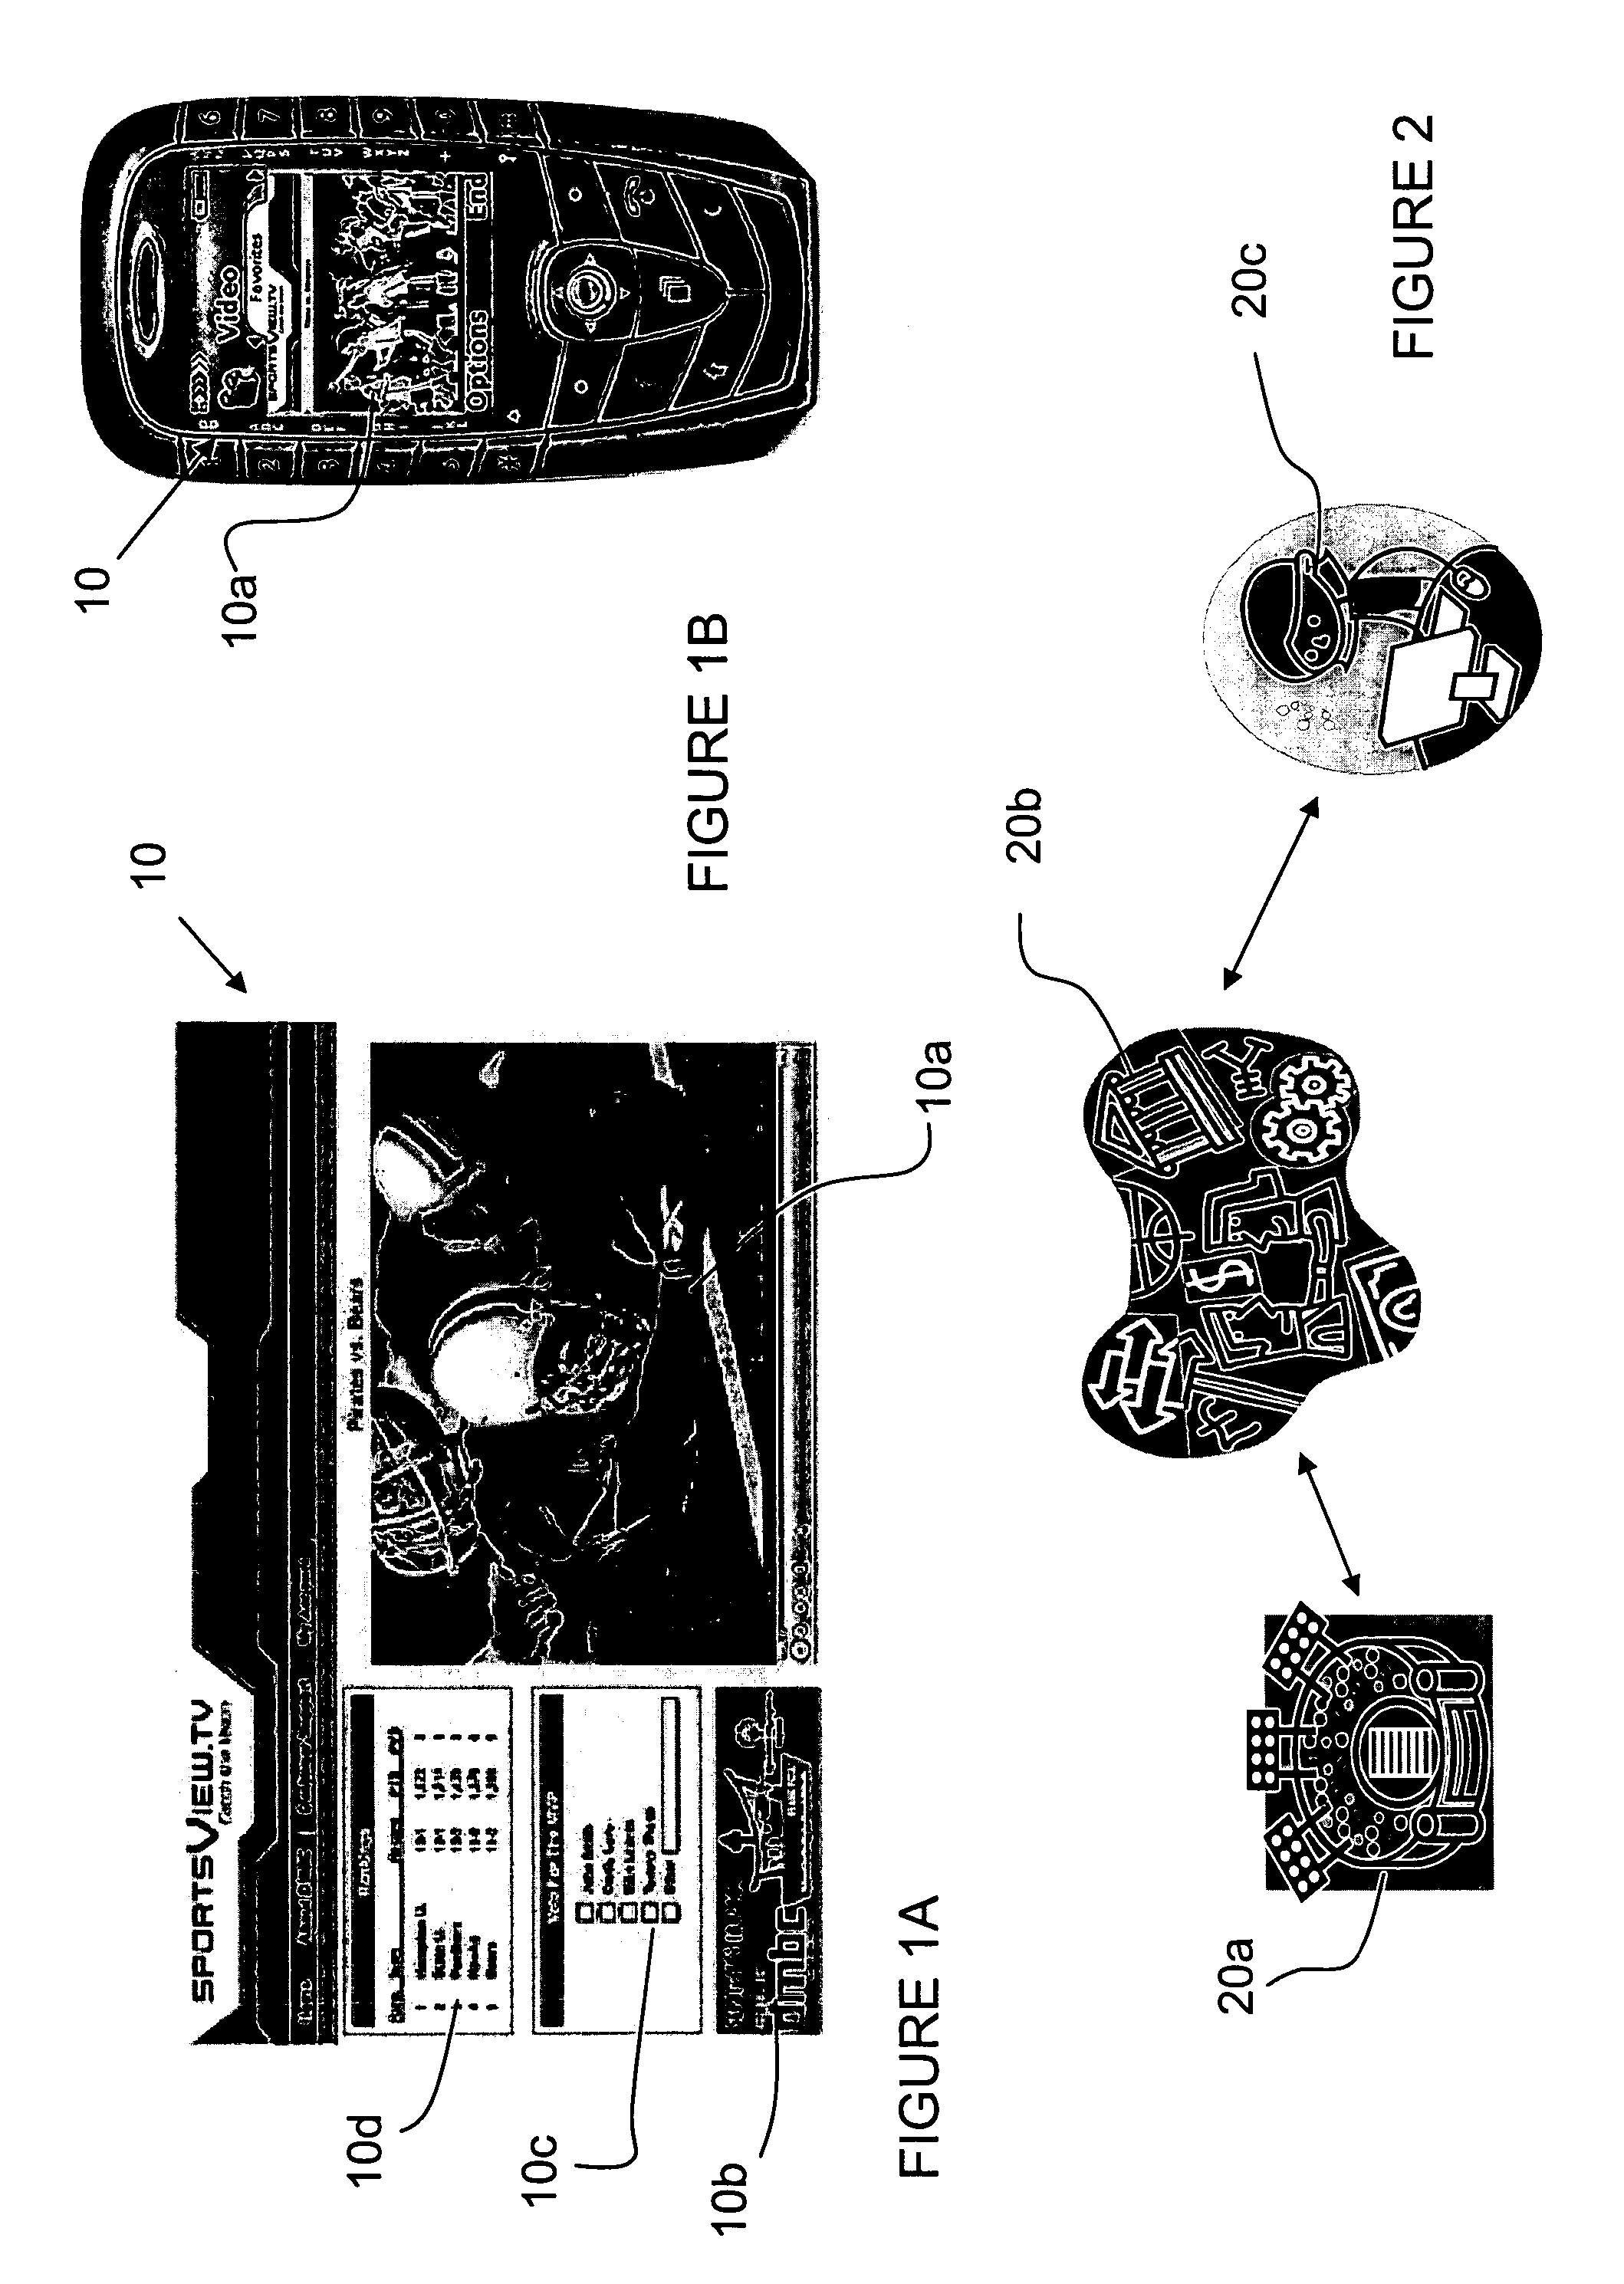 System and method for unlimited channel broadcasting